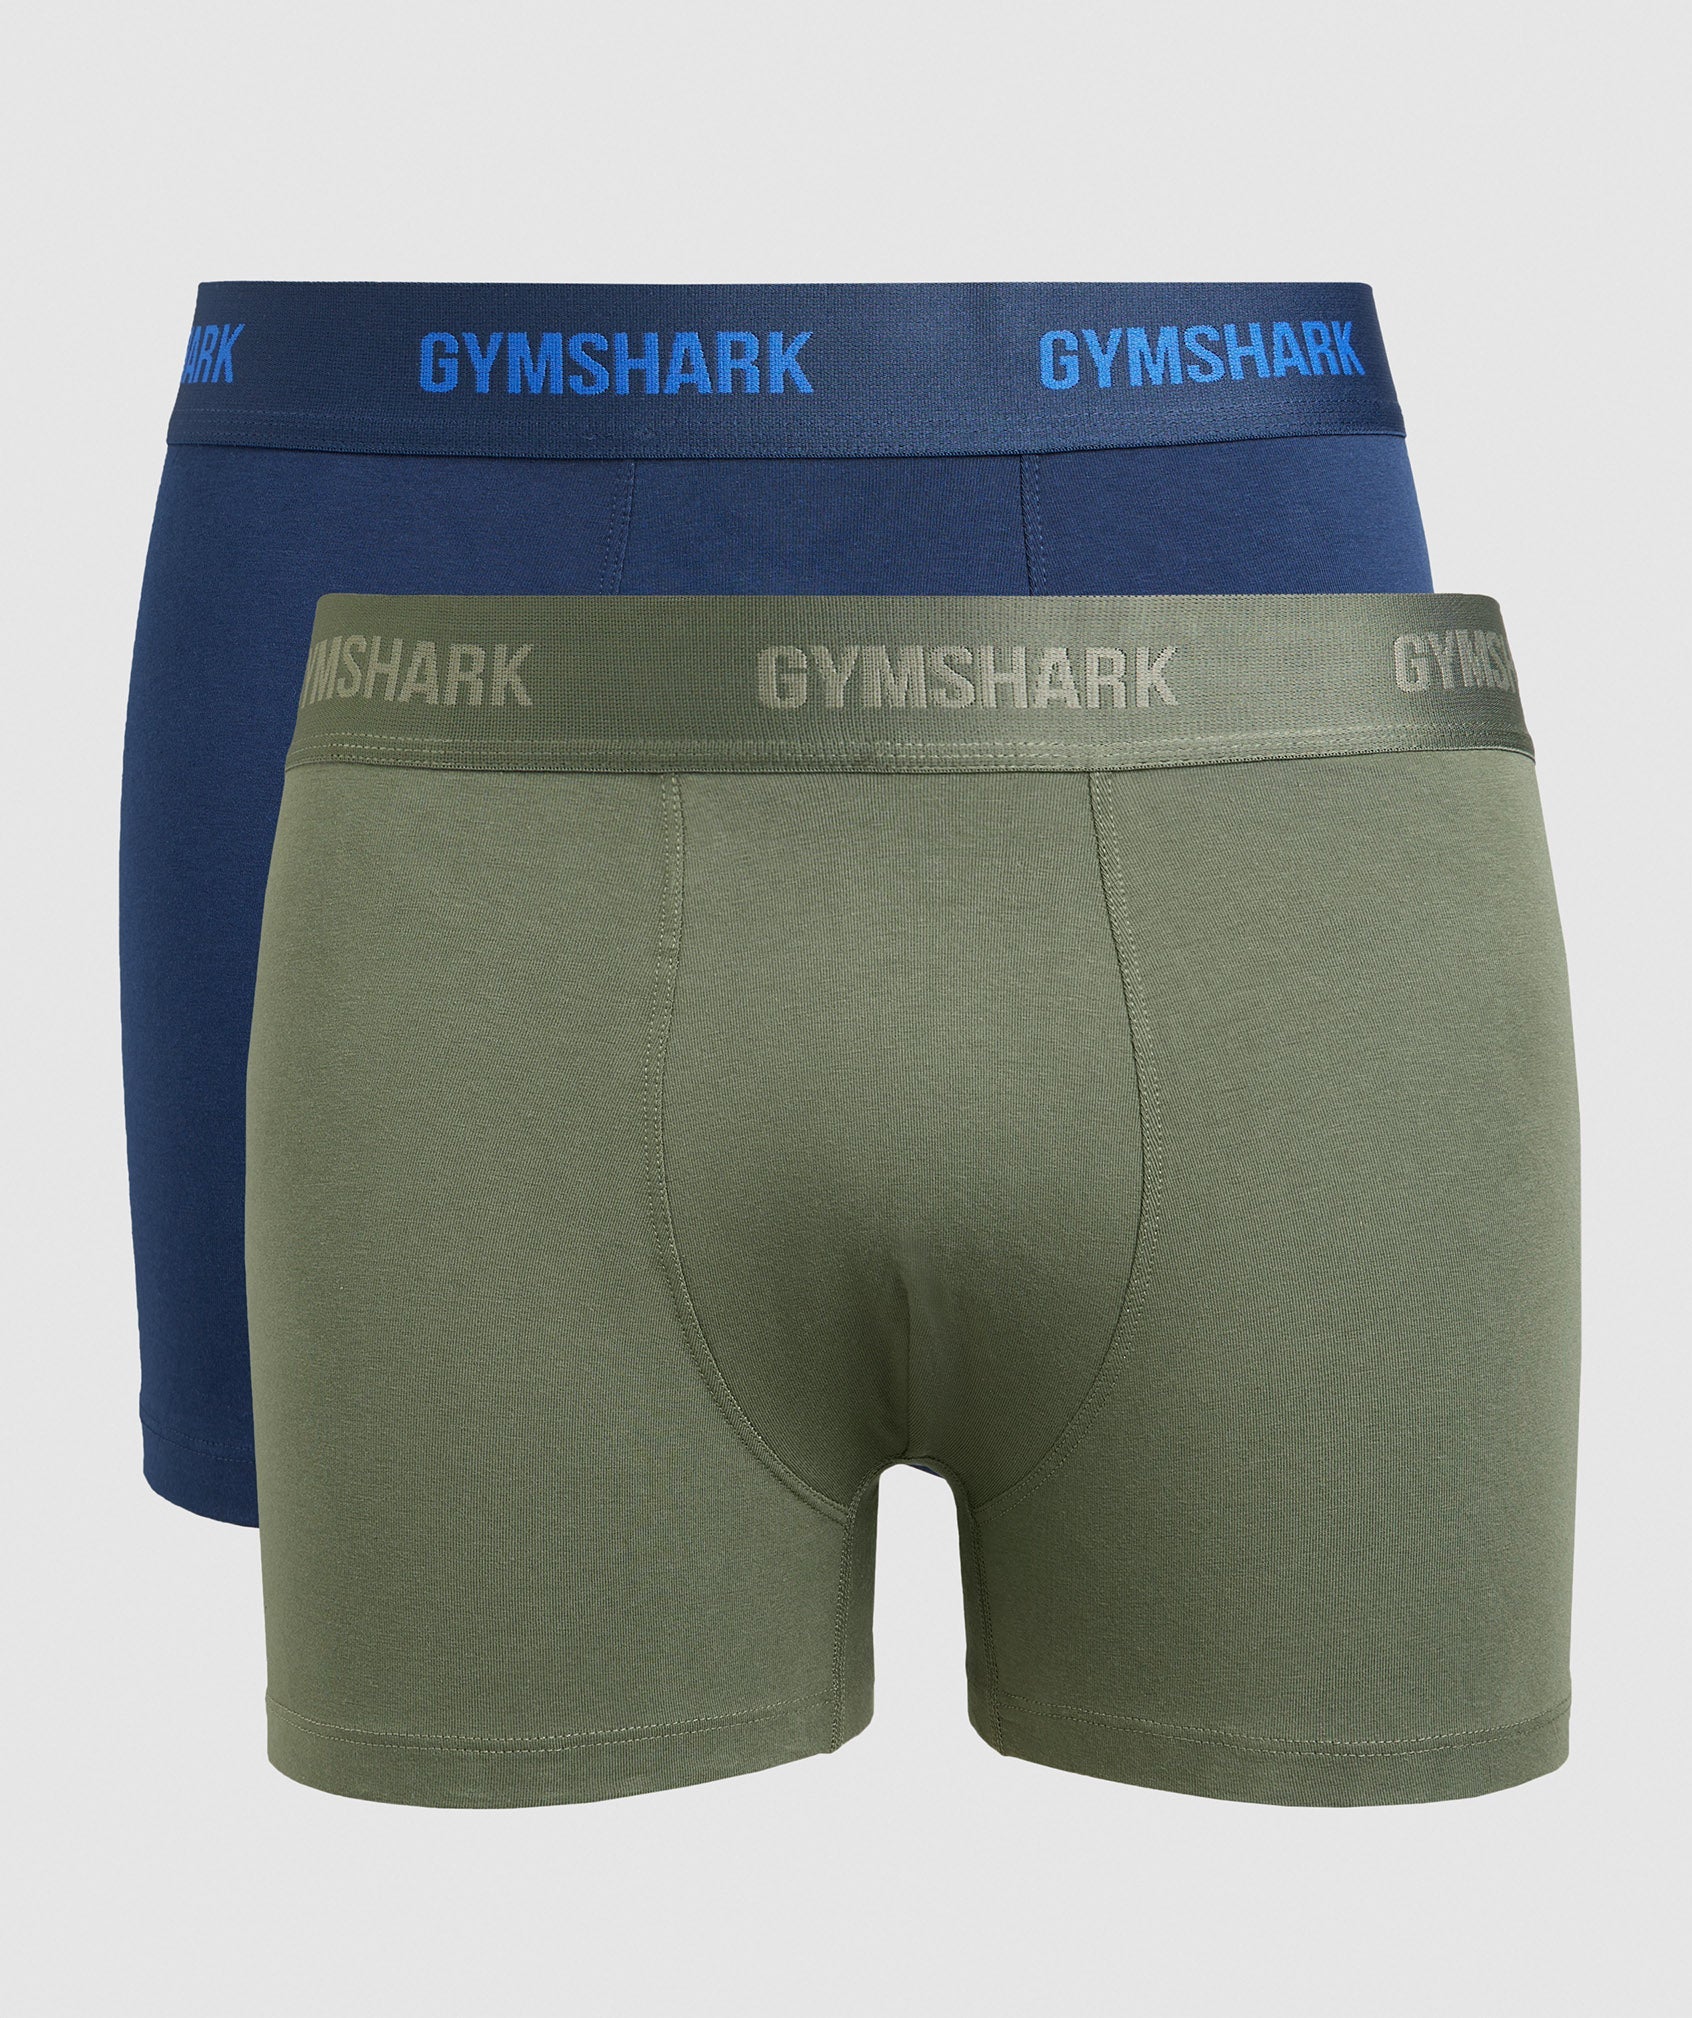 Boxers 2pk in Core Olive/Navy - view 1